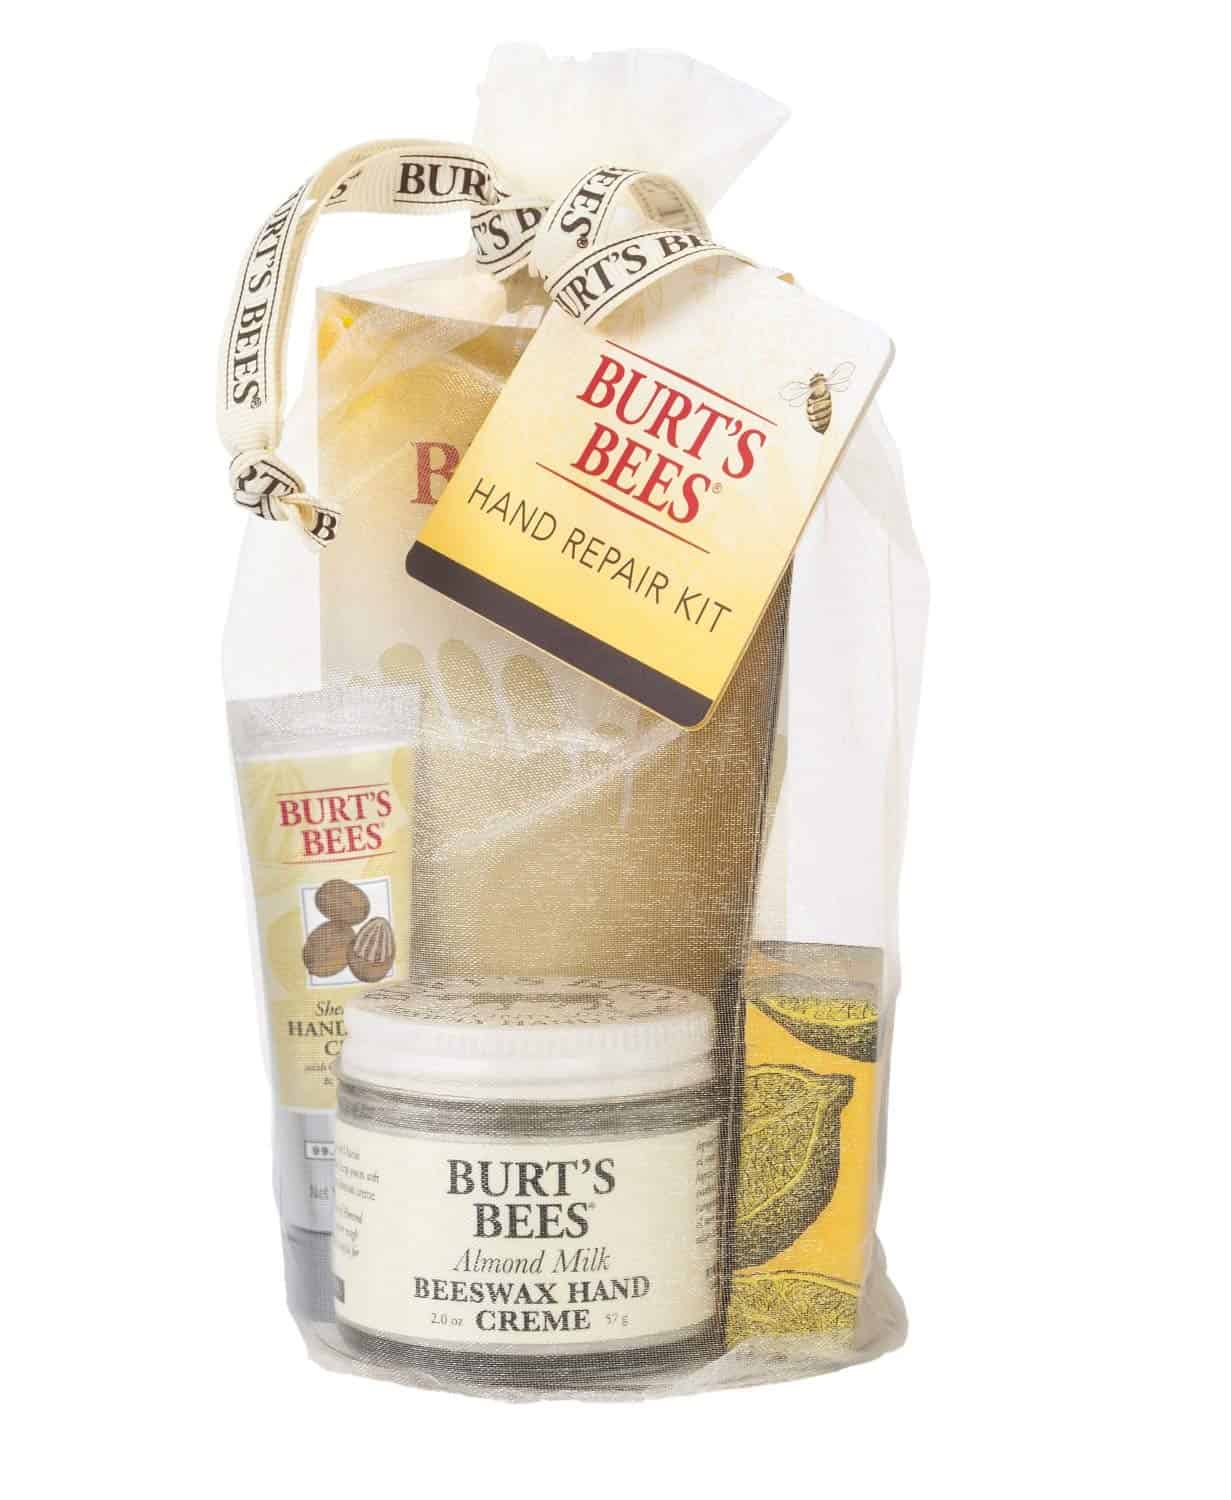 Burts Bees Gift Set, Gift Ideas for Coworkers 